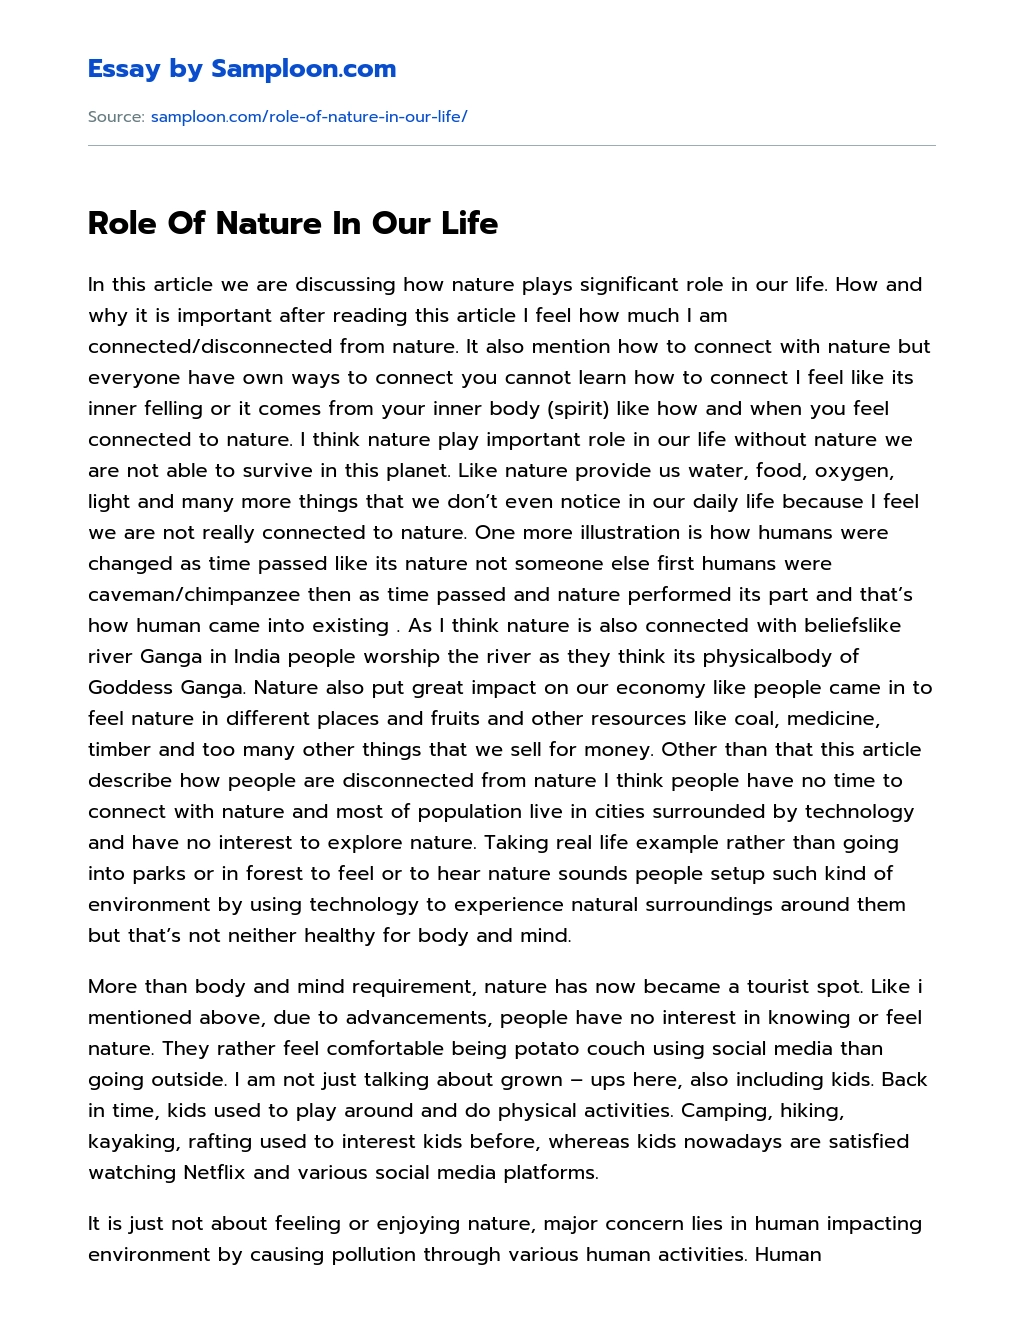 Role Of Nature In Our Life essay